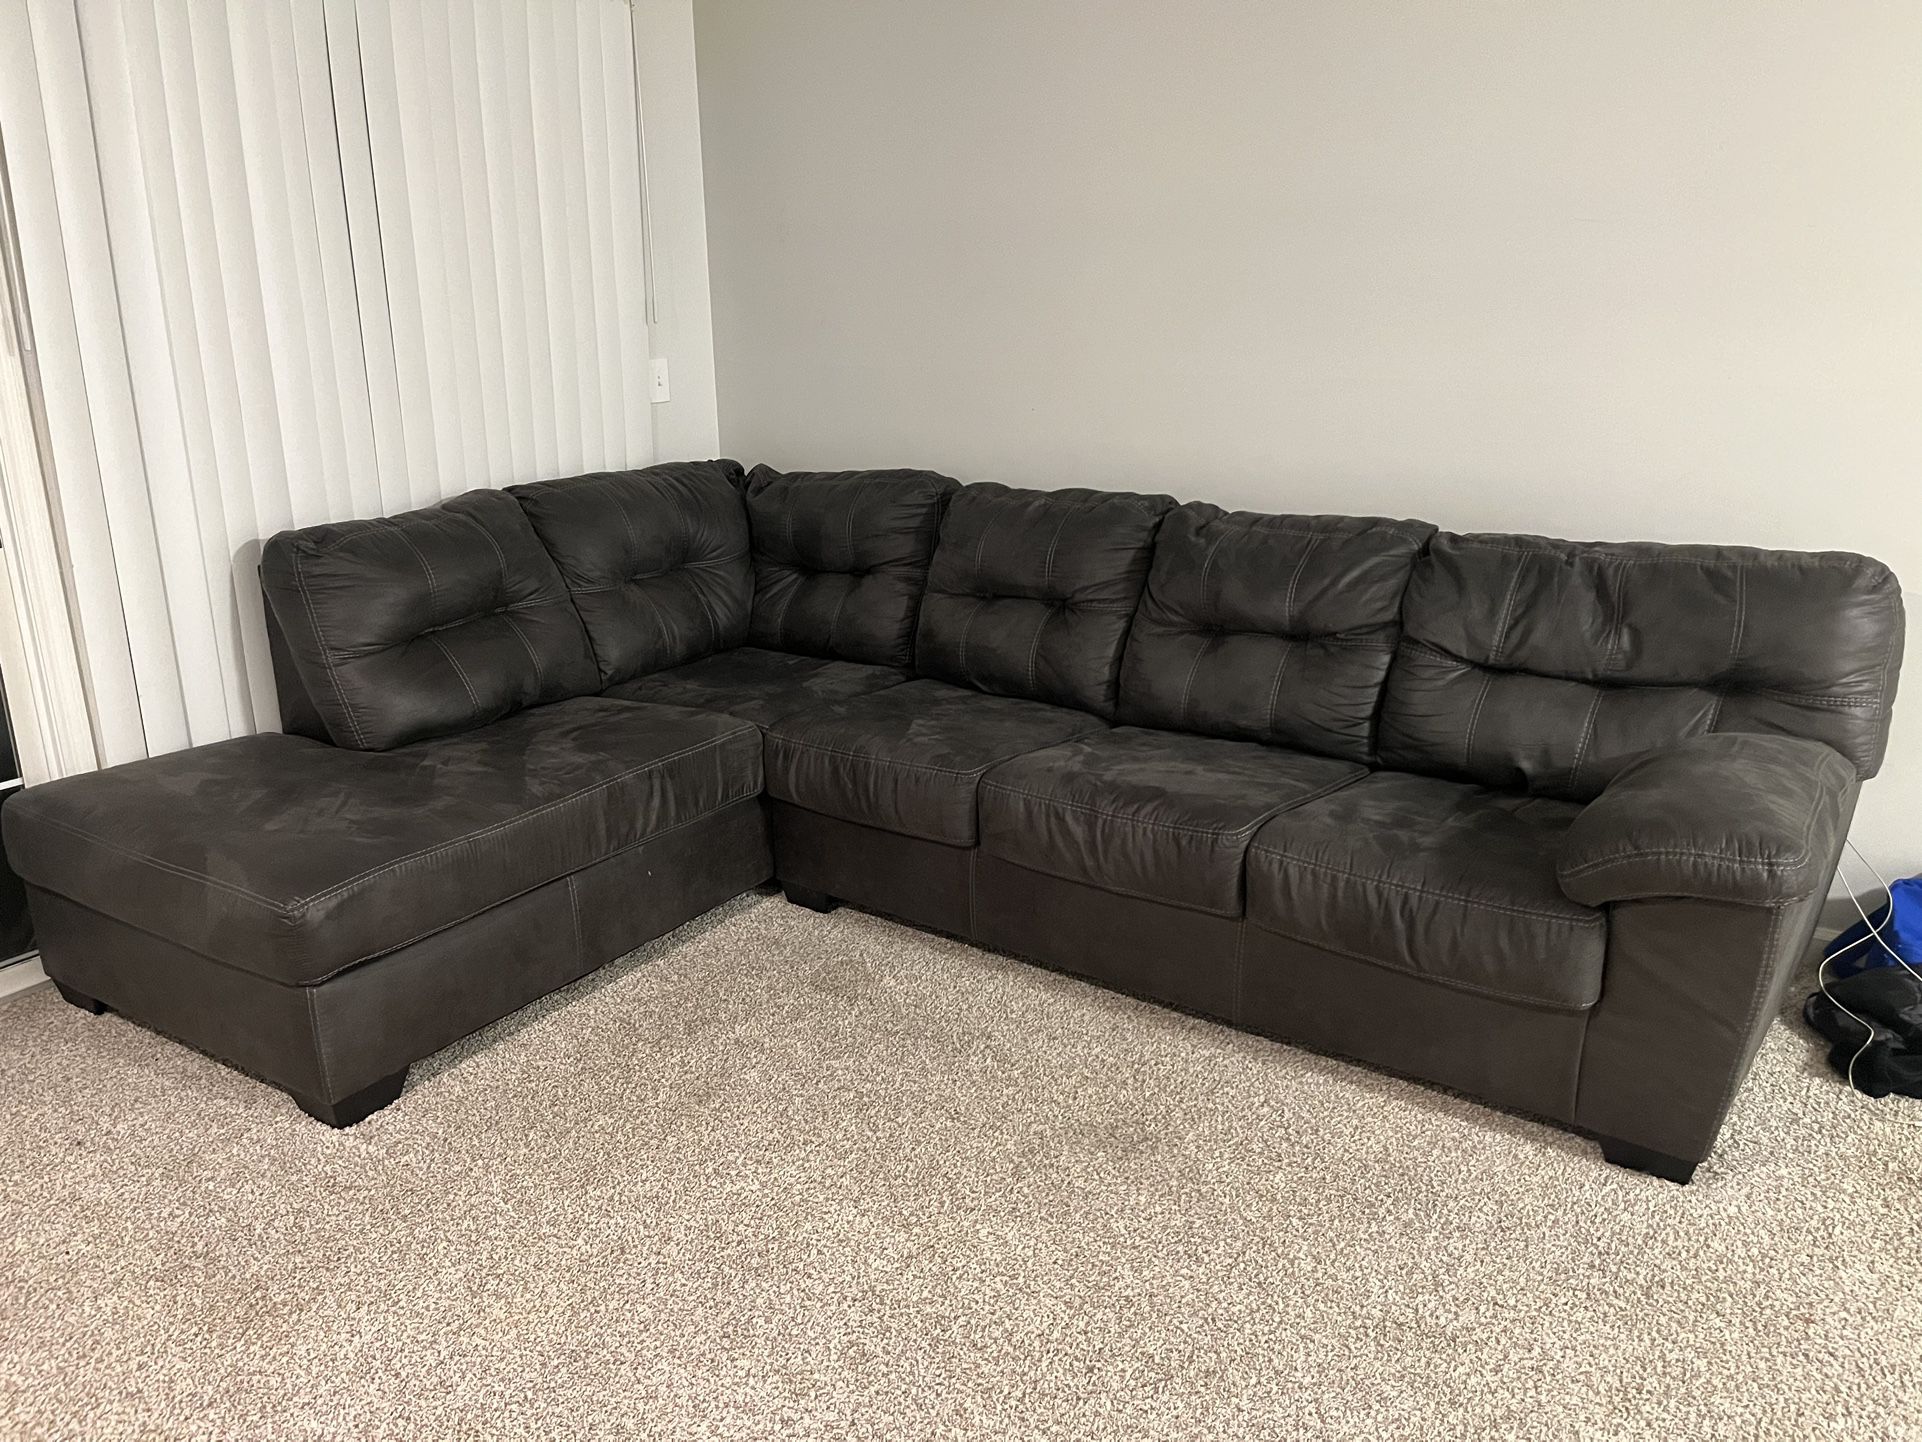 Dark grey sectional couch used